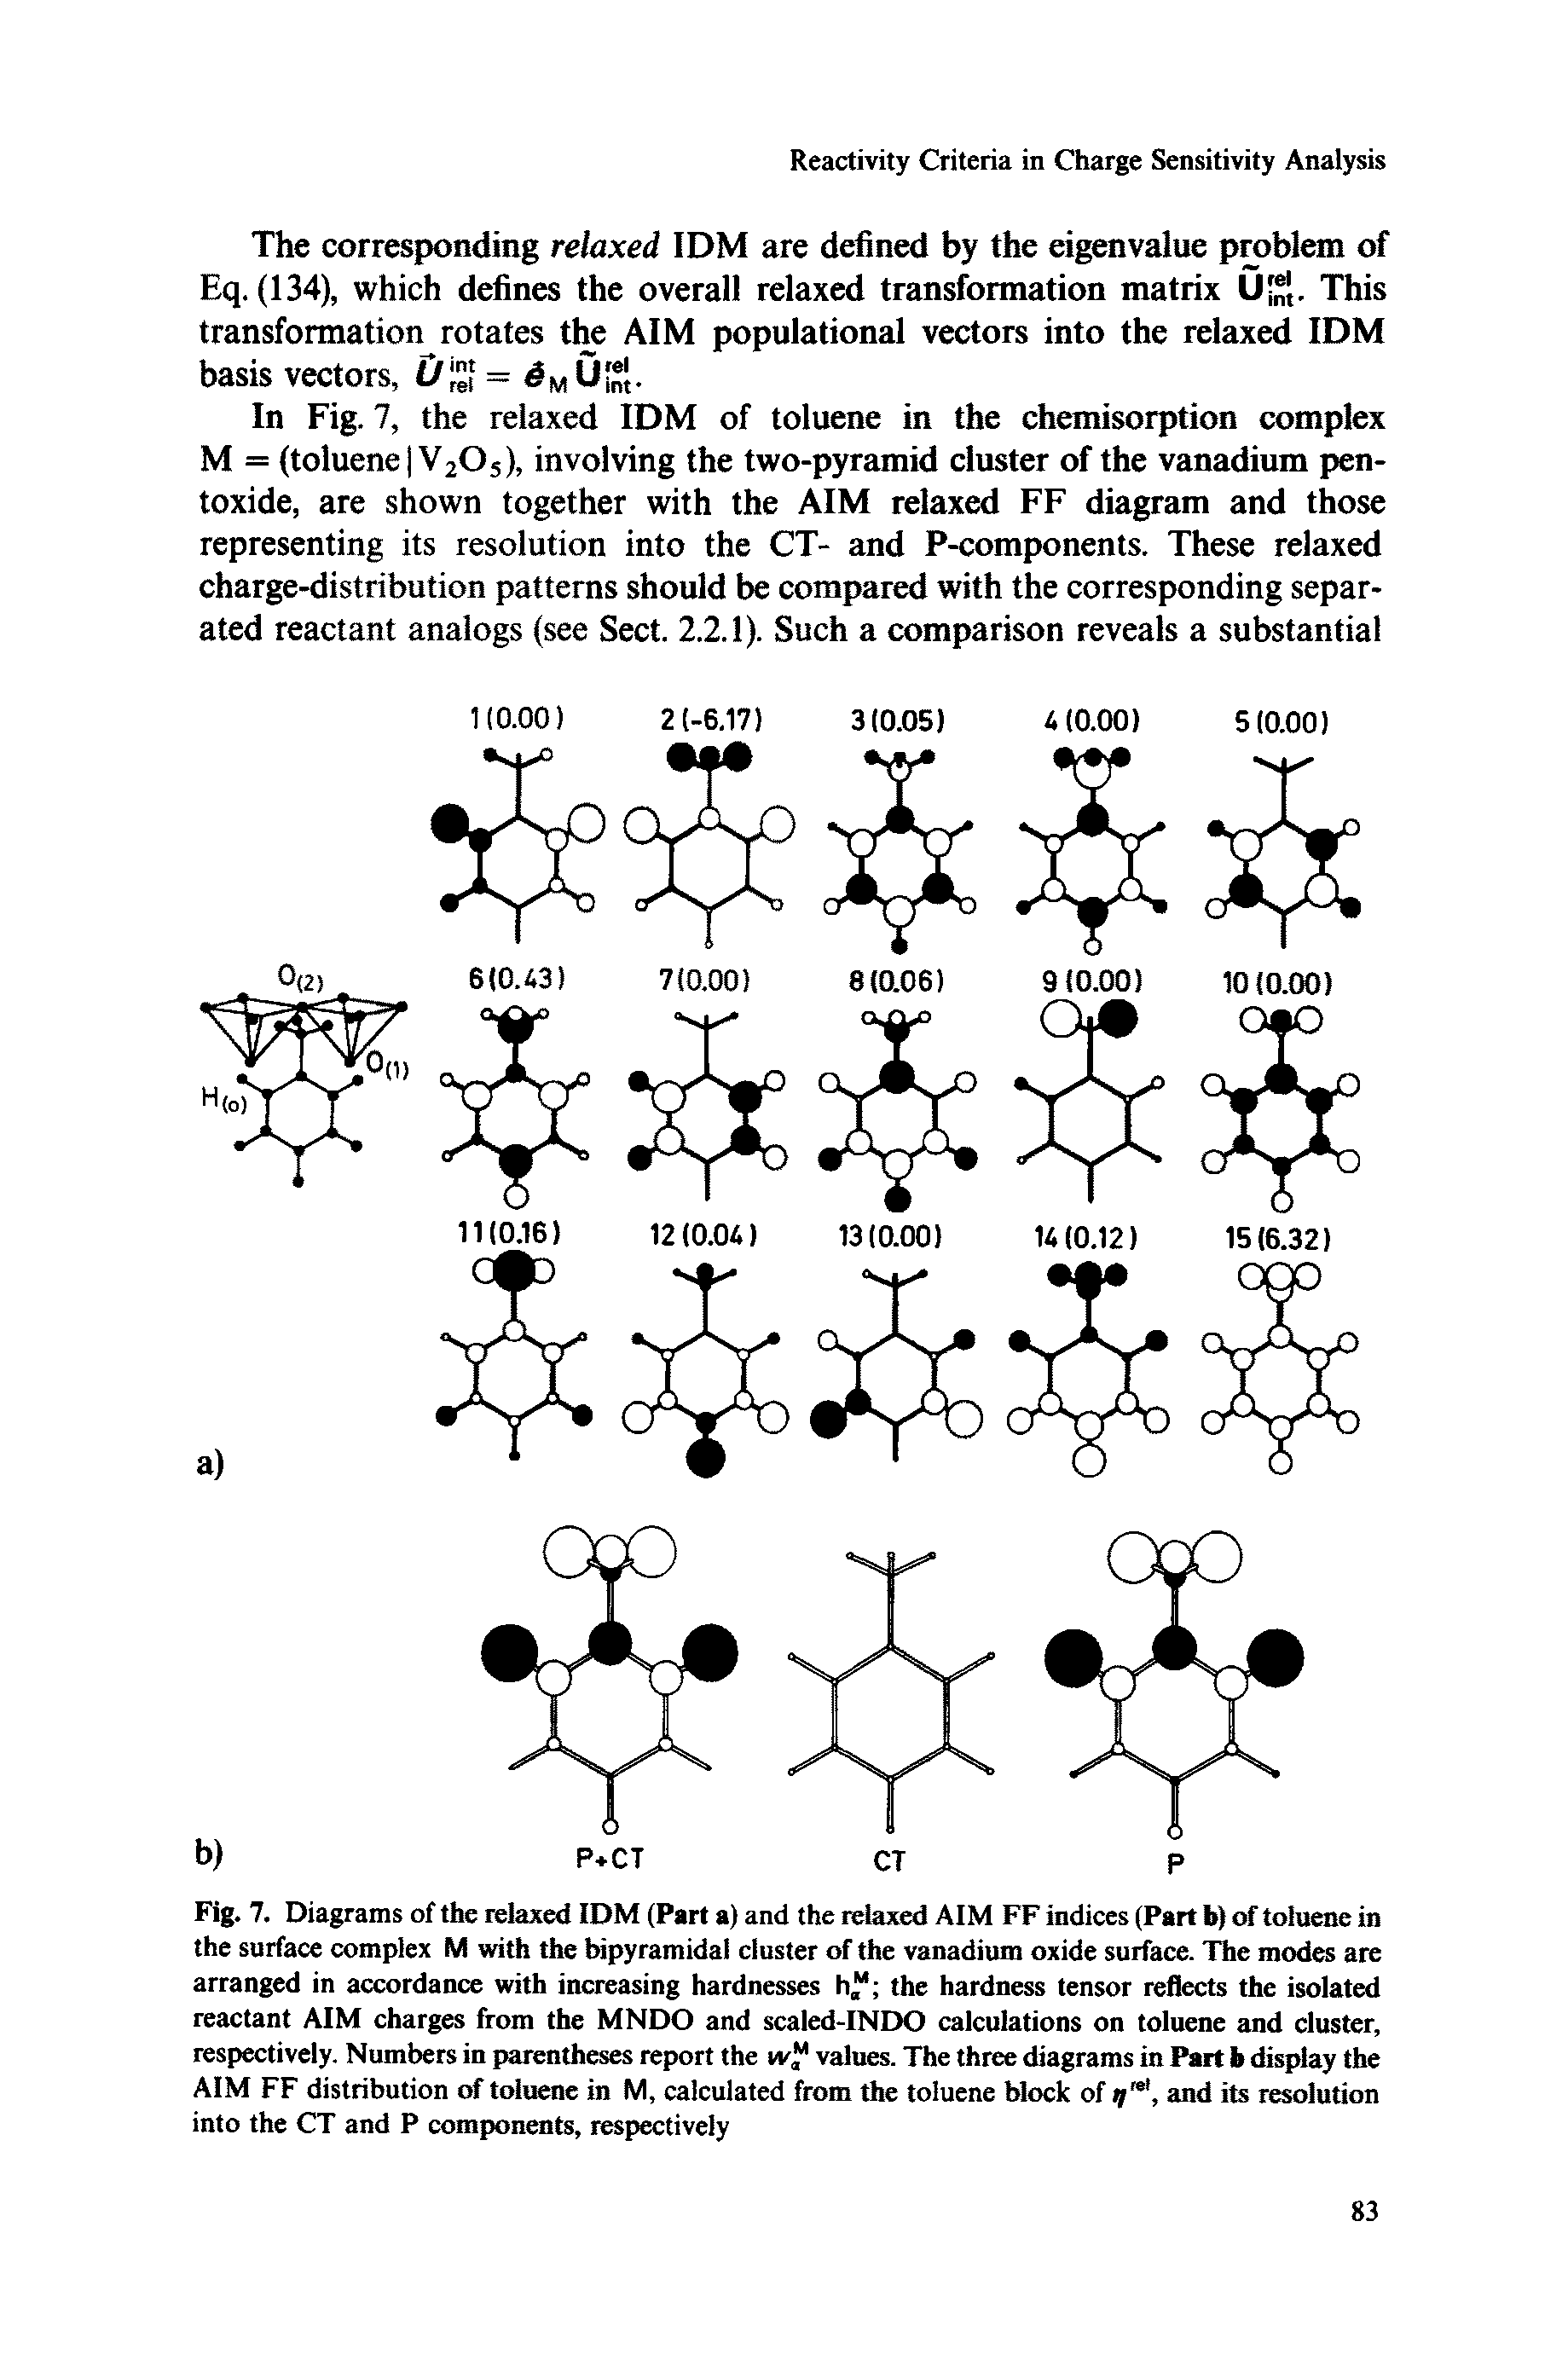 Fig. 7. Diagrams of the relaxed IDM (Part a) and the relaxed AIM FF indices (Part b) of toluene in the surface complex M with the bipyramidal cluster of the vanadium oxide surface. The modes are arranged in accordance with increasing hardnesses h the hardness tensor reflects the isolated reactant AIM charges from the MNDO and scaled-INDO calculations on toluene and cluster, respectively. Numbers in parentheses report the w values. The three diagrams in Part b display the AIM FF distribution of toluene in M, calculated from the toluene block of i/ 1, and its resolution into the CT and P components, respectively...